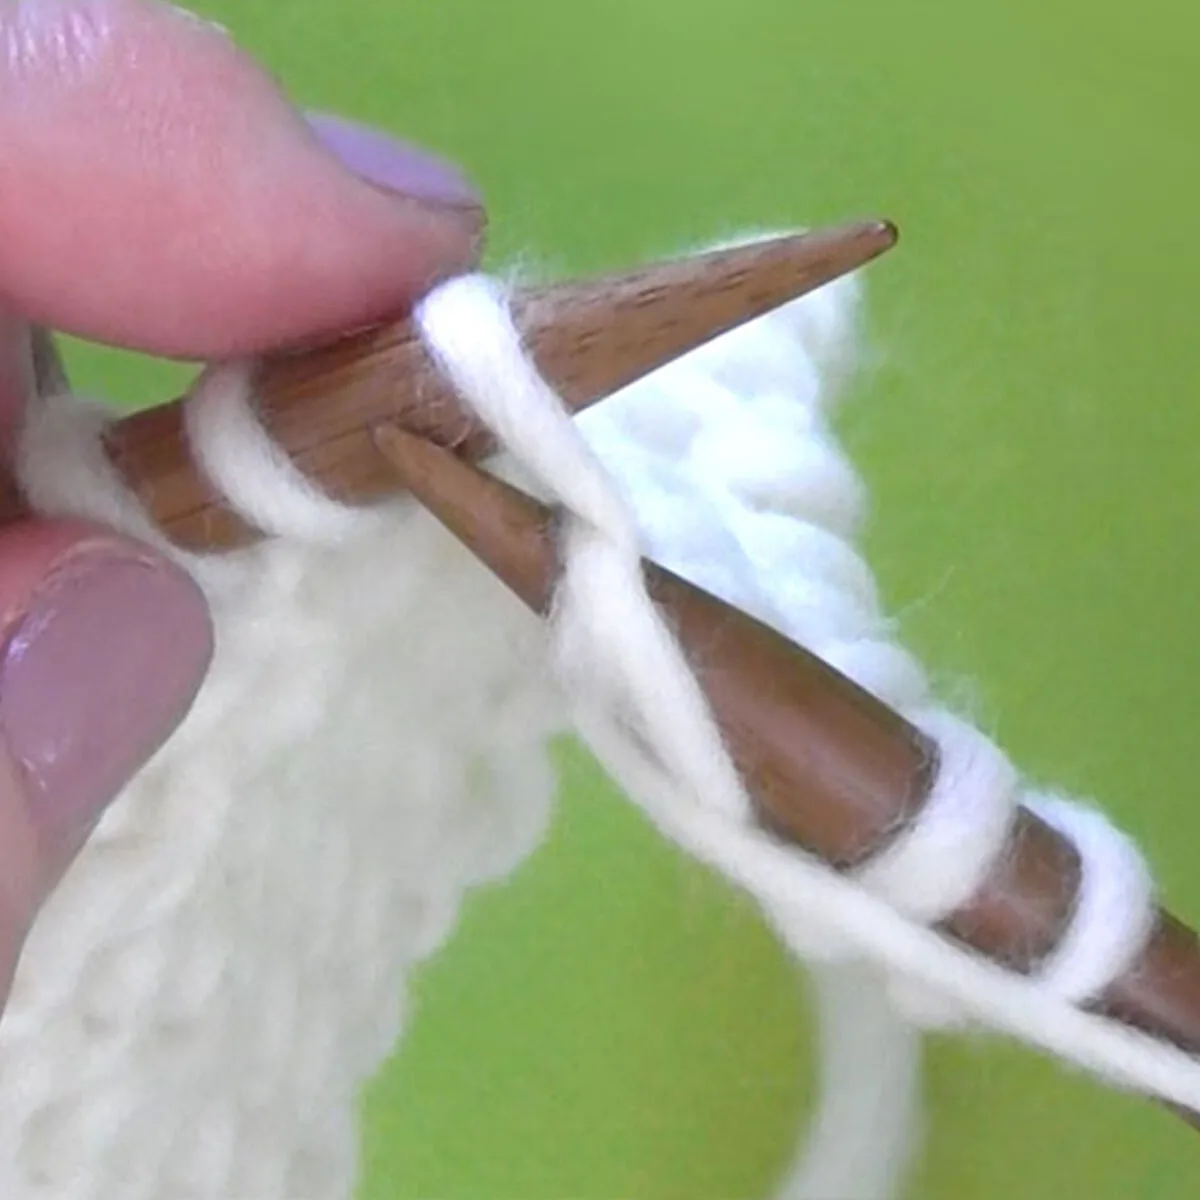 Hands purl stitch with knitting needle and white color yarn.